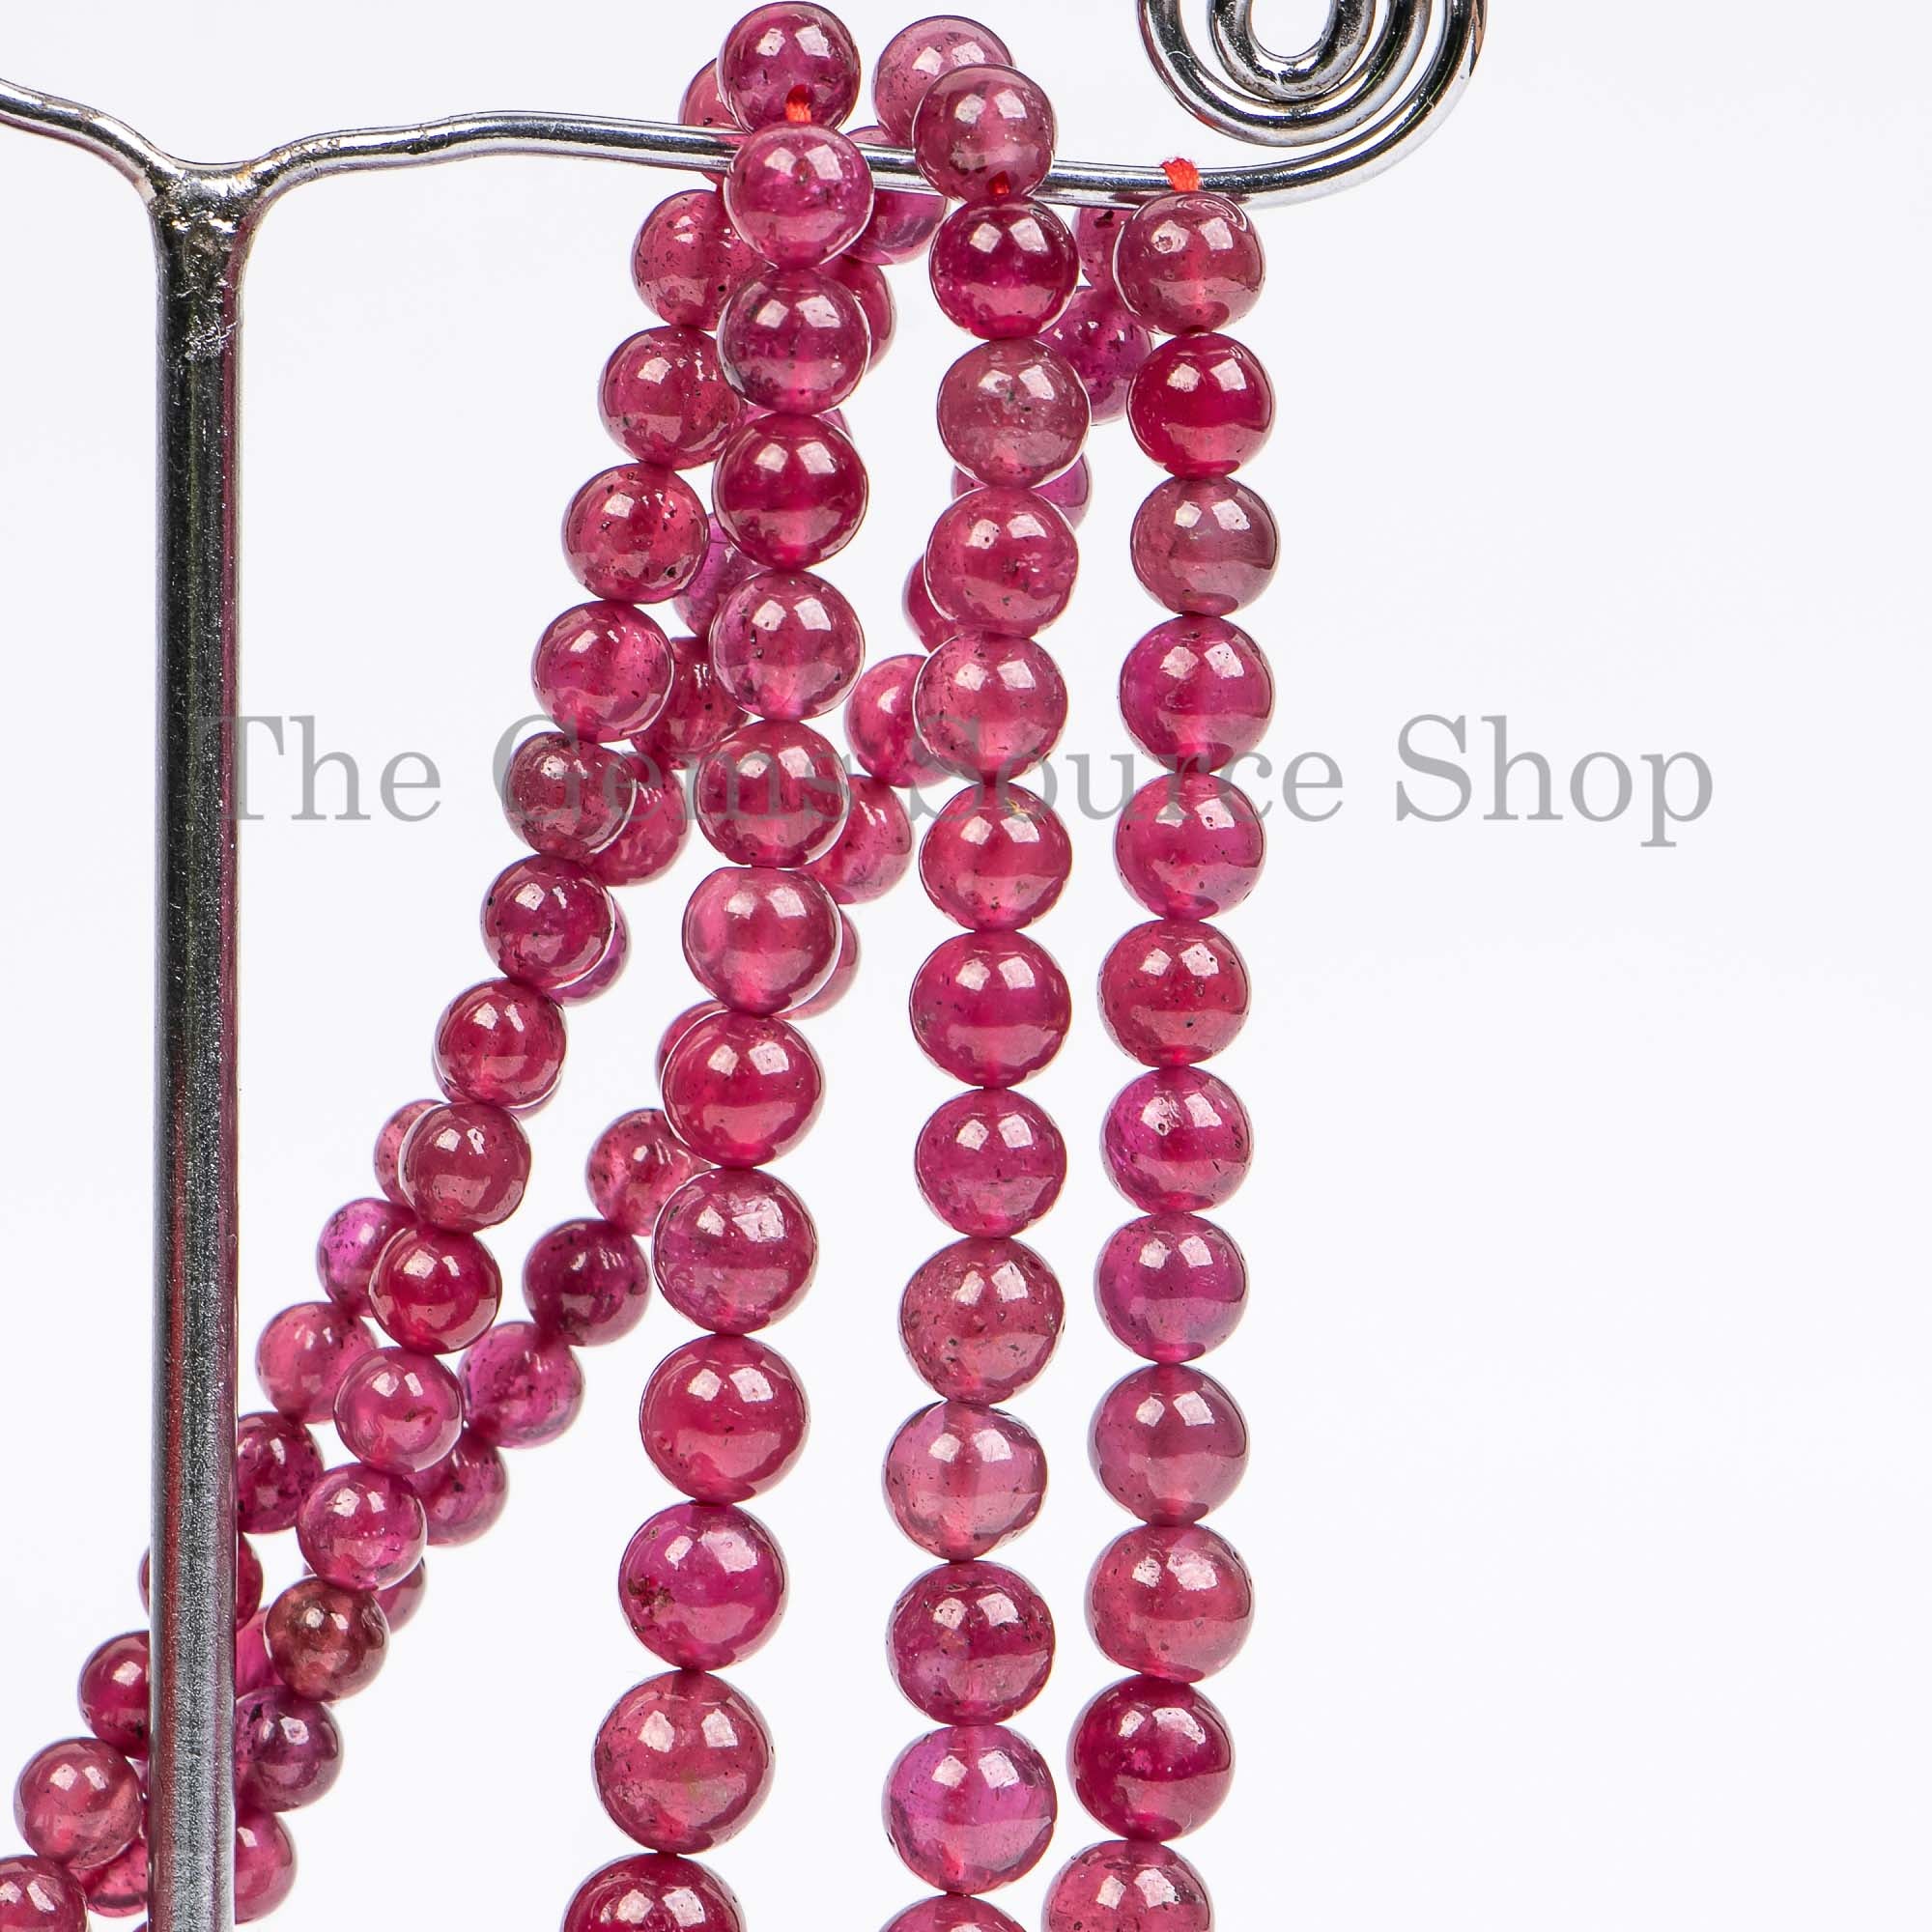 Natural Ruby Smooth Round Shape Beads, Plain Ruby Gemstone Beads, Wholesale Beads